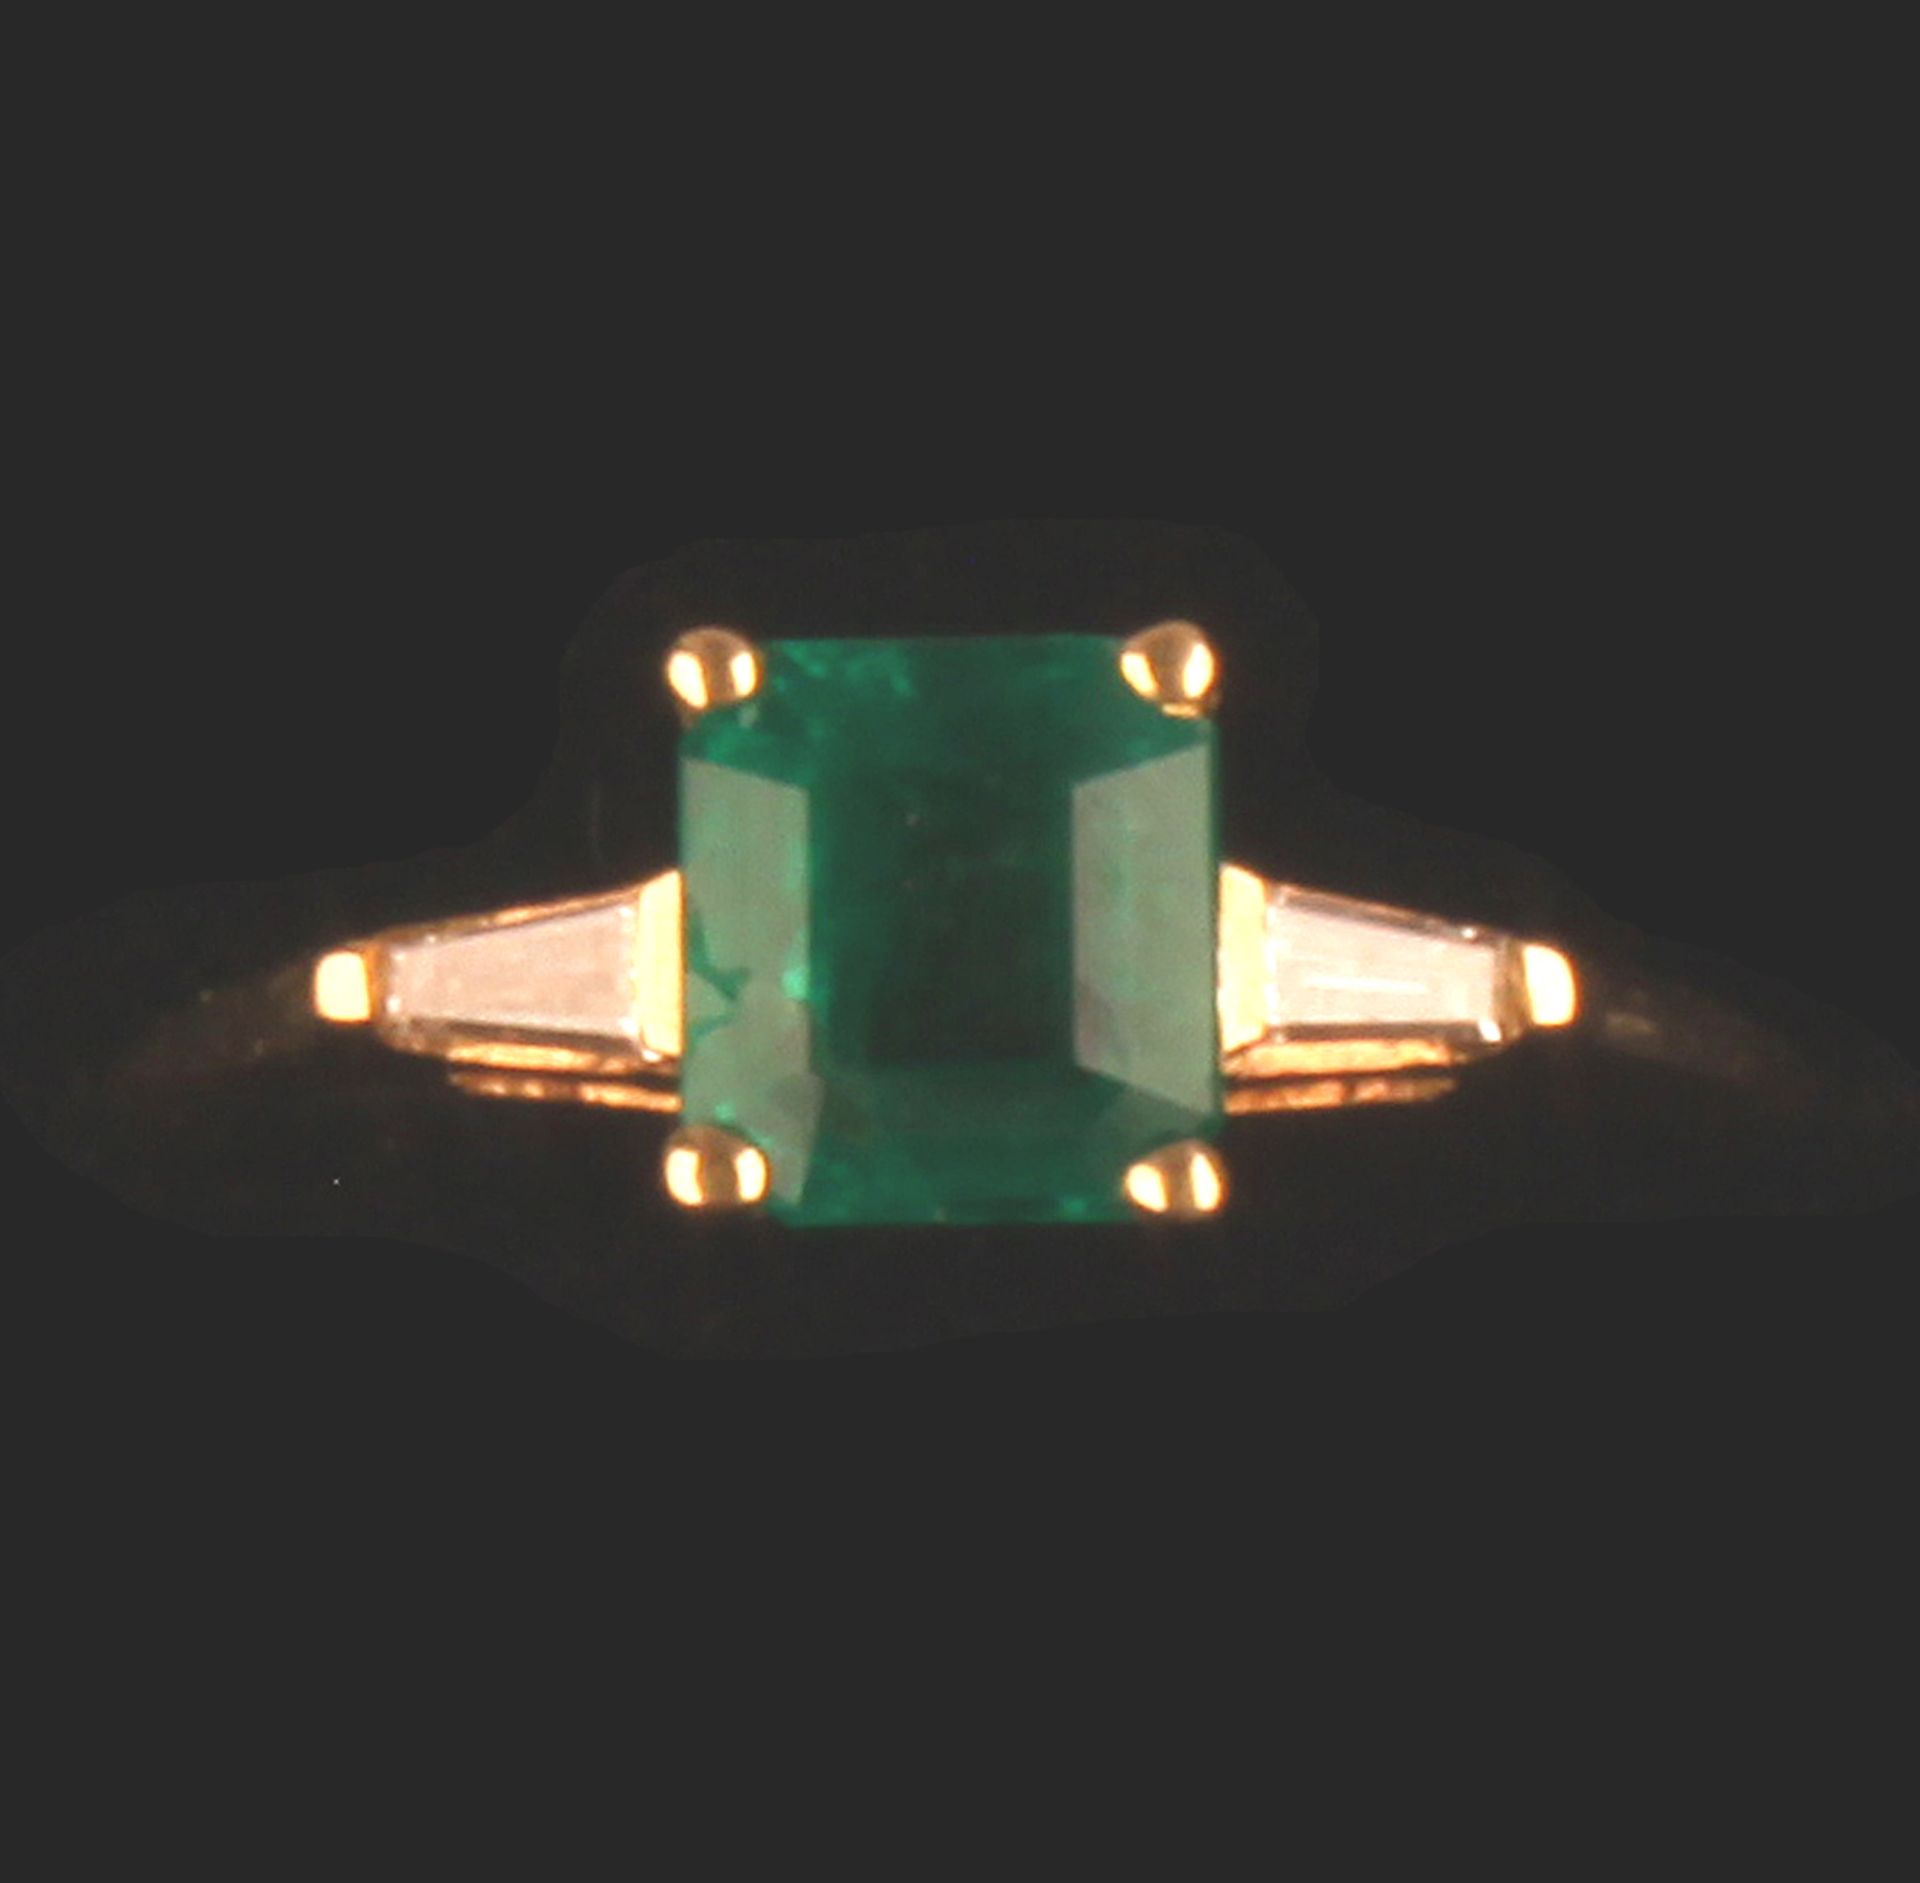 14ct GOLD RING SET WITH LARGE SQ CUT EMERALD & 2 X TAPERED BAGUETTE DIAMONDS - Image 2 of 4